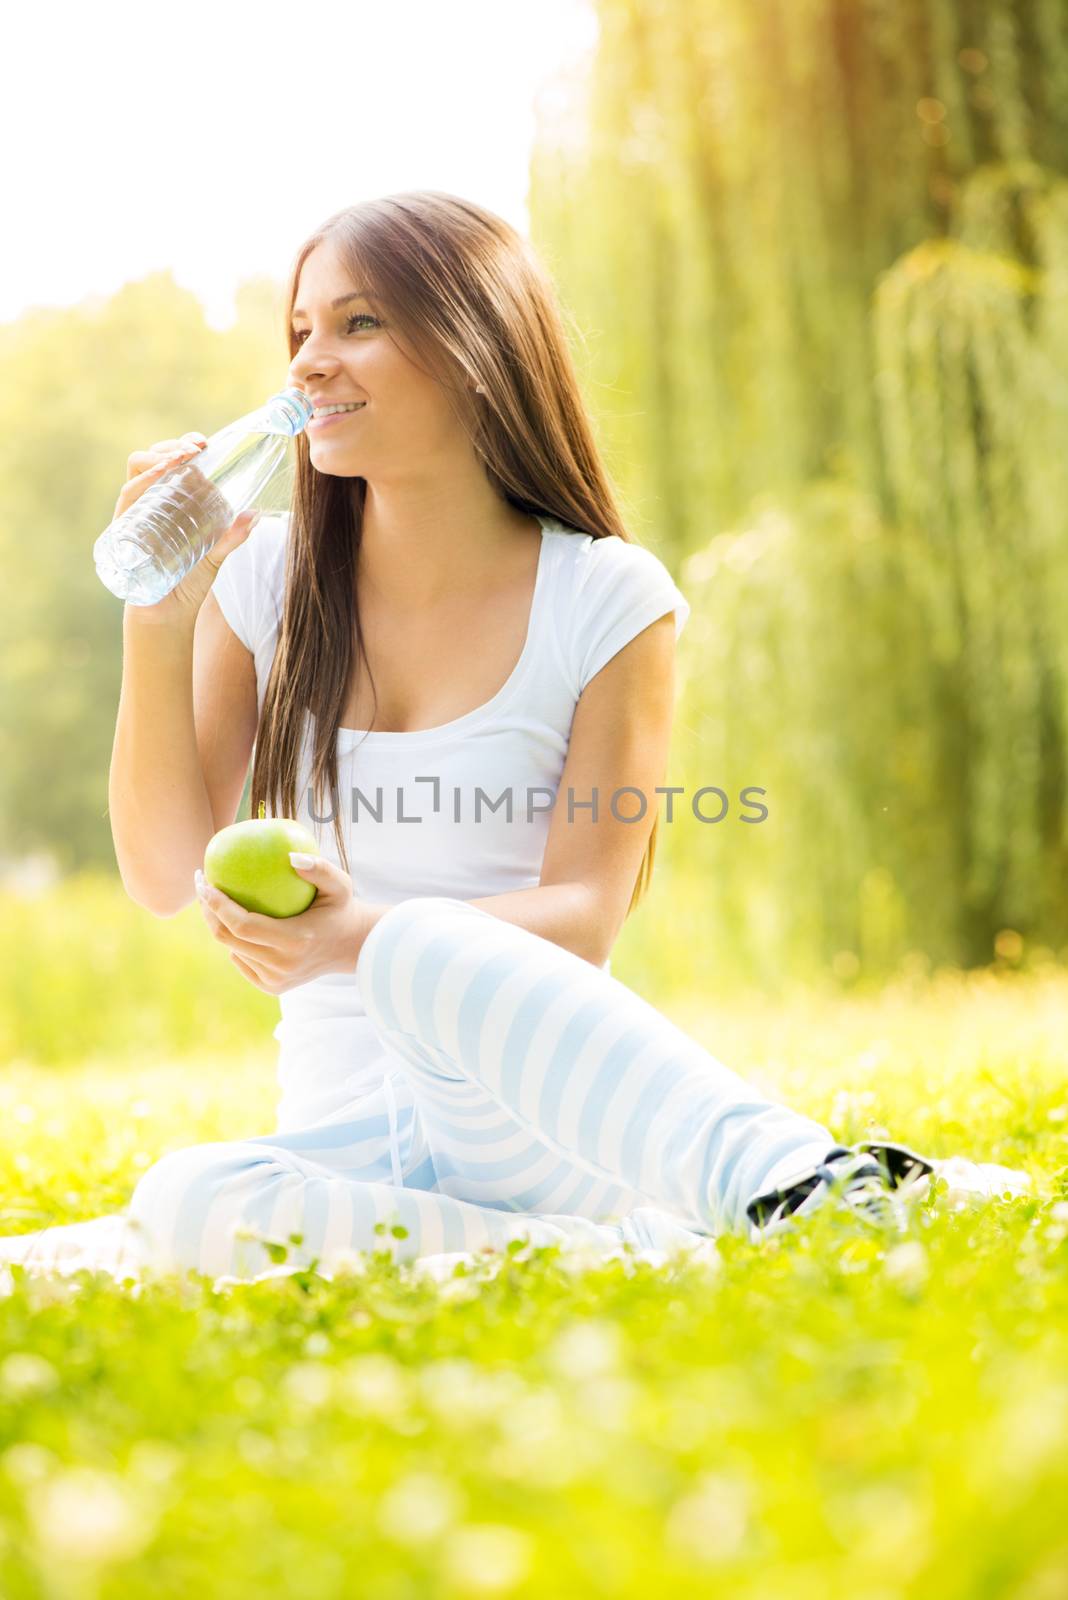 Smiling young woman holding an apple, drinks water from a bottle and enjoying in the nature.